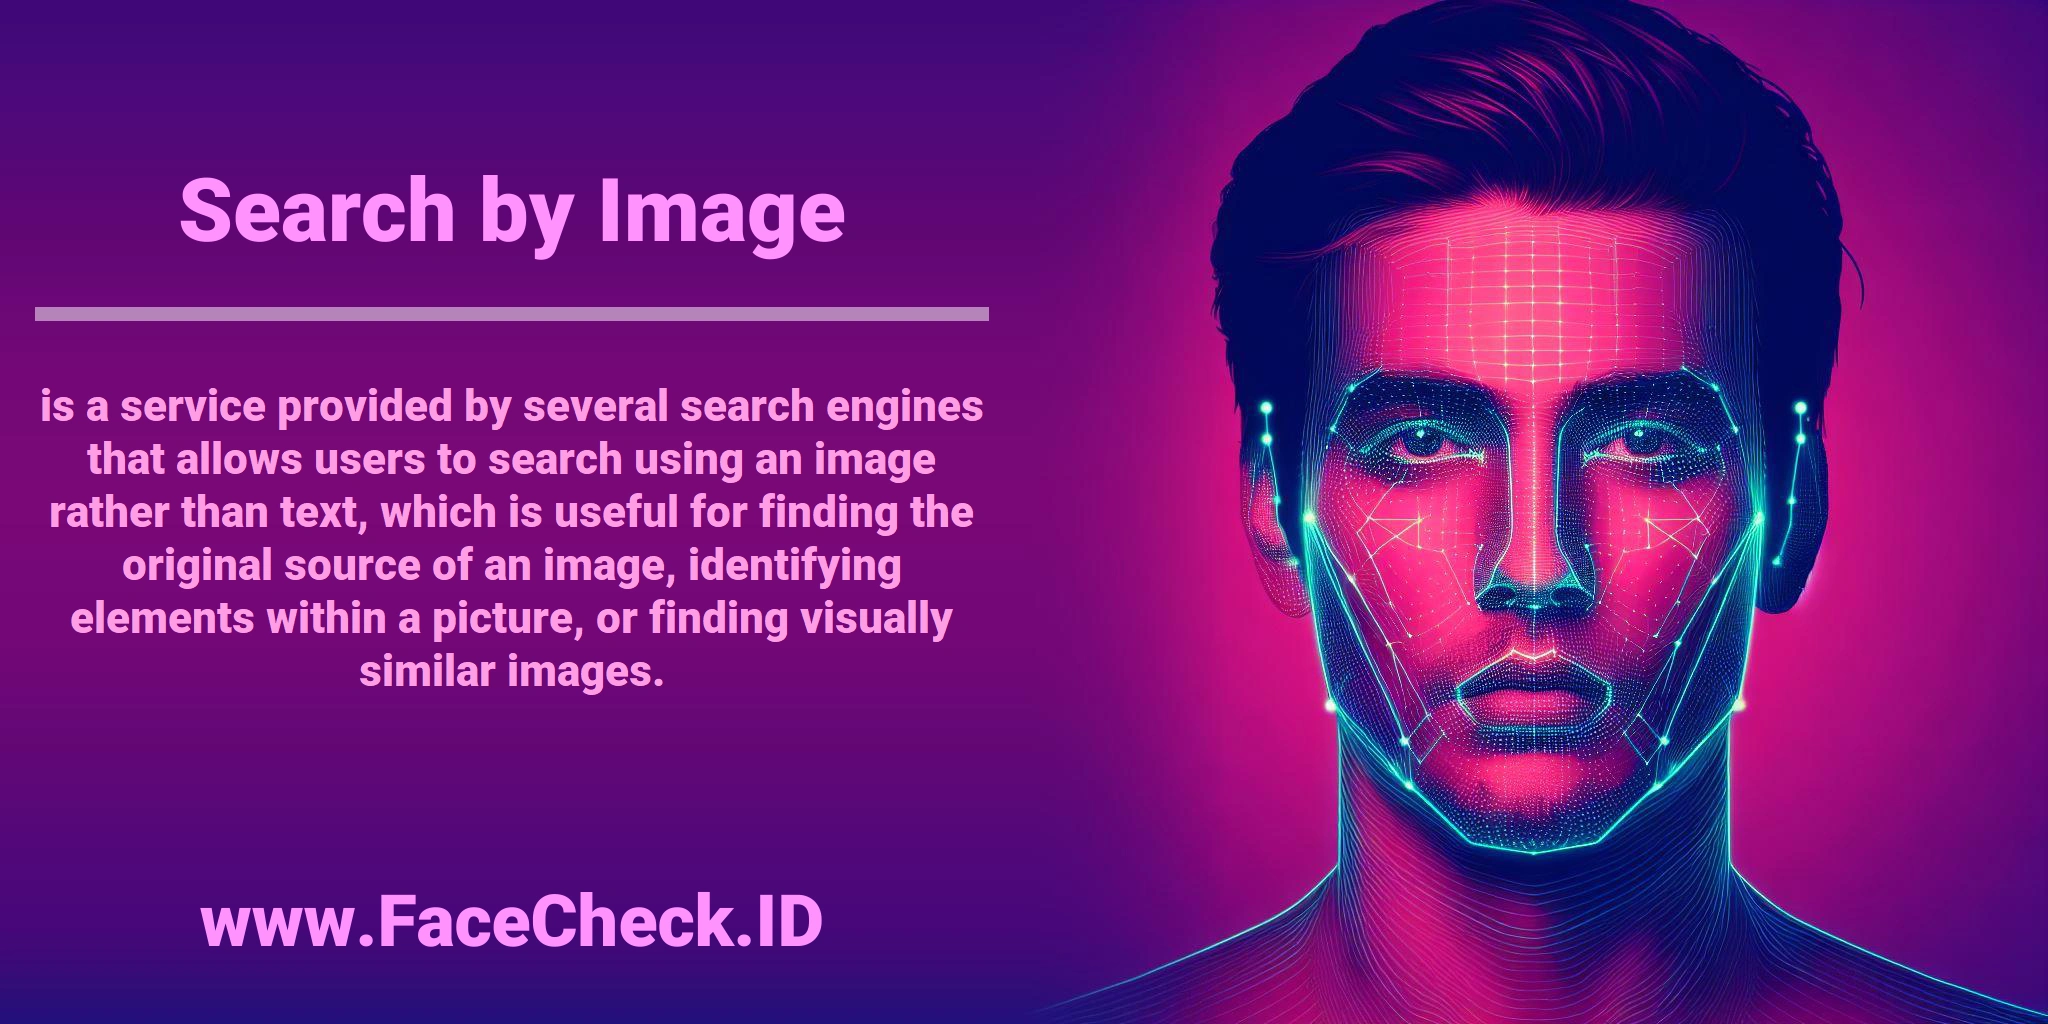 <b>Search by Image</b> is a service provided by several search engines that allows users to search using an image rather than text, which is useful for finding the original source of an image, identifying elements within a picture, or finding visually similar images.
